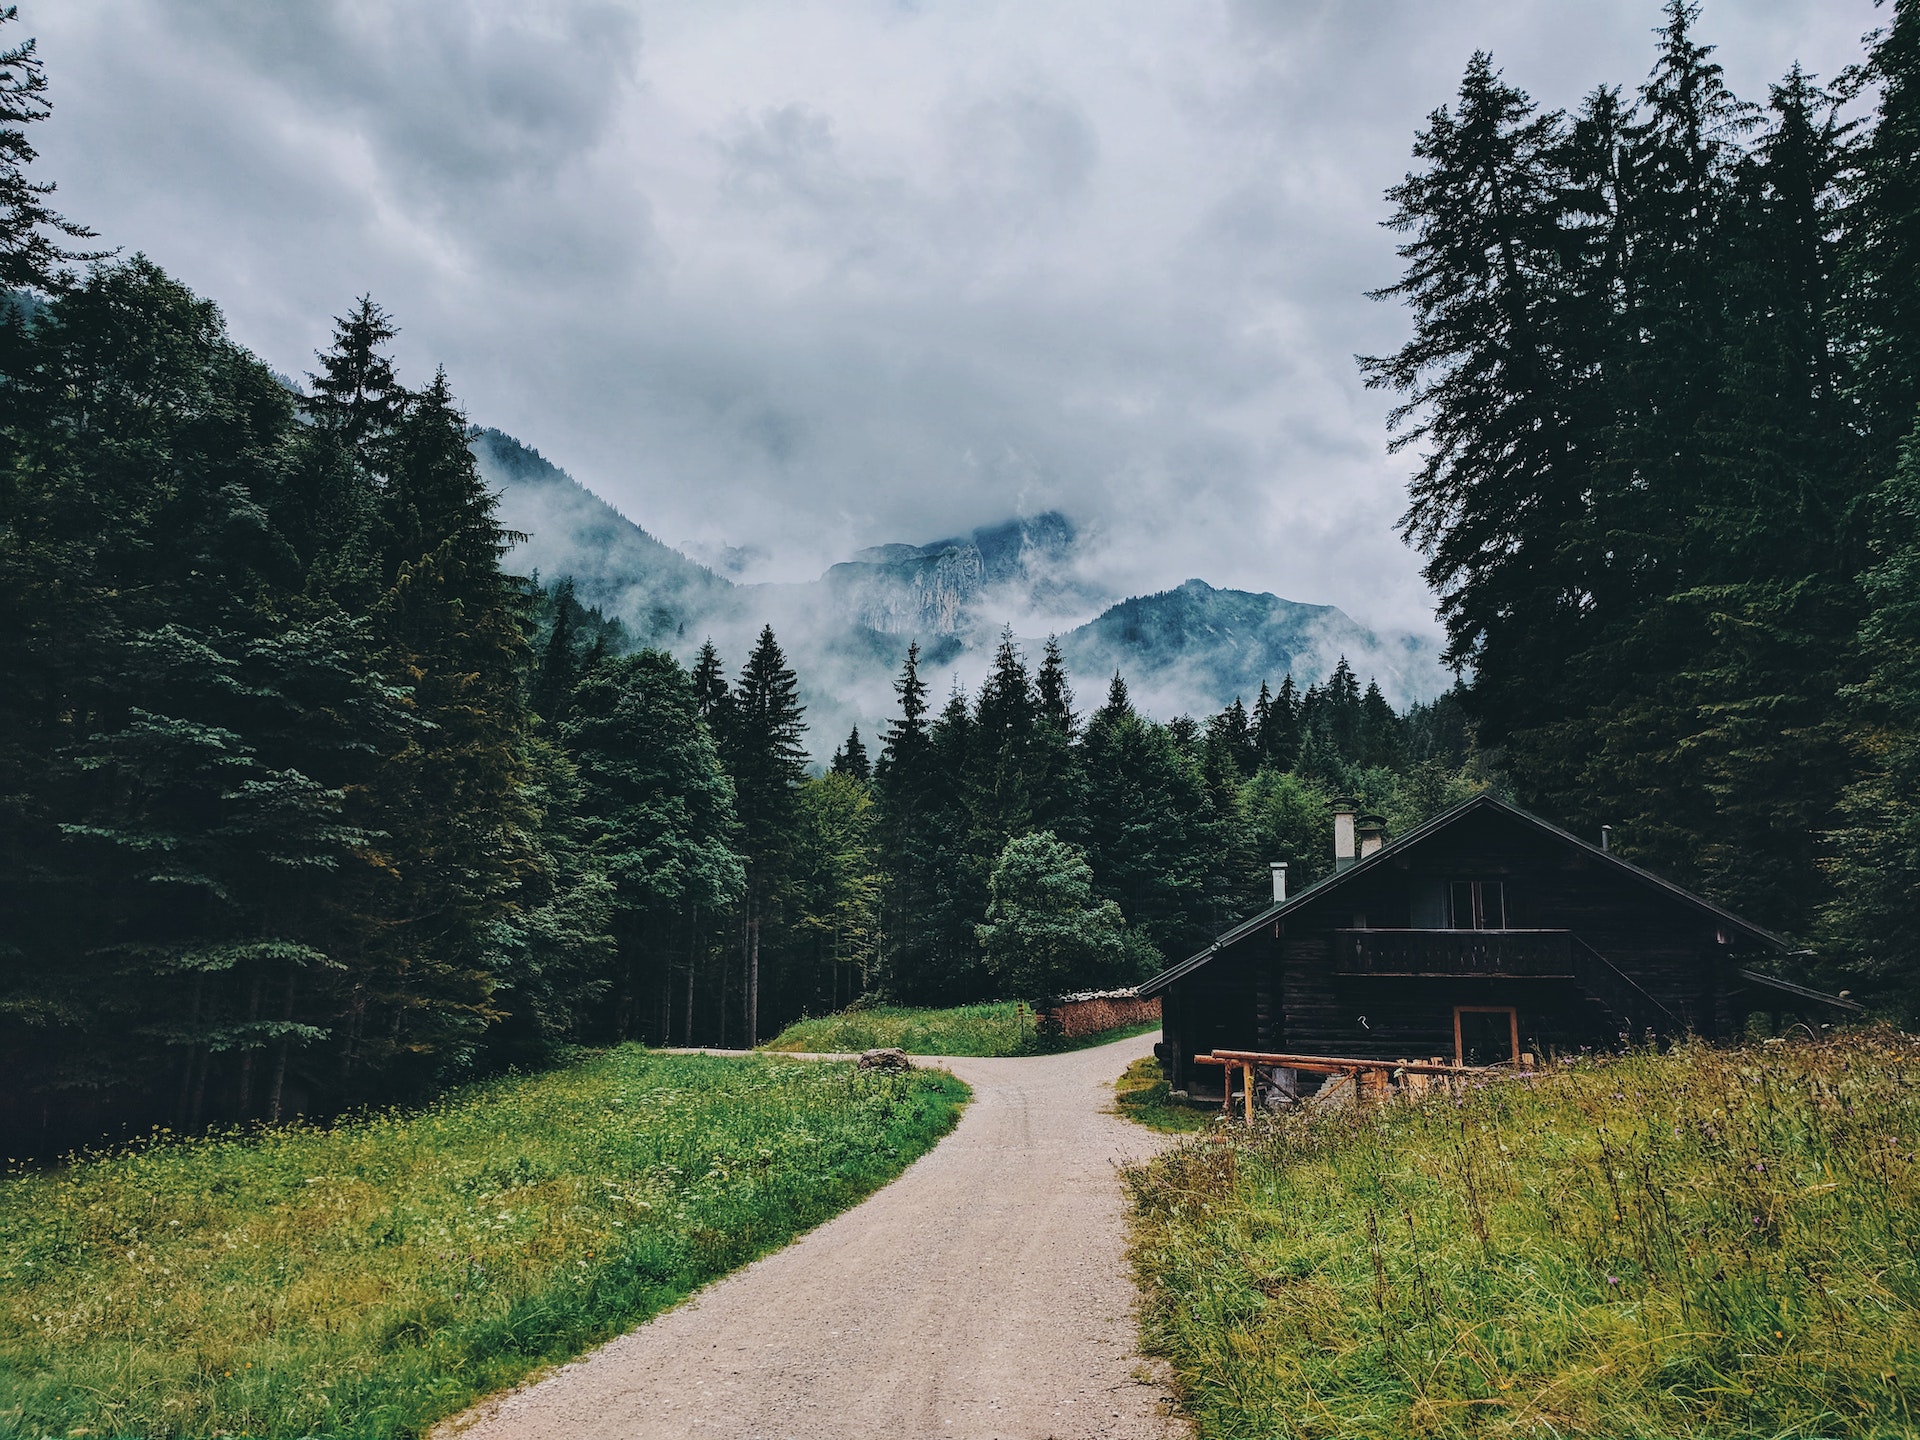 A house in the woods | Source: Pexels